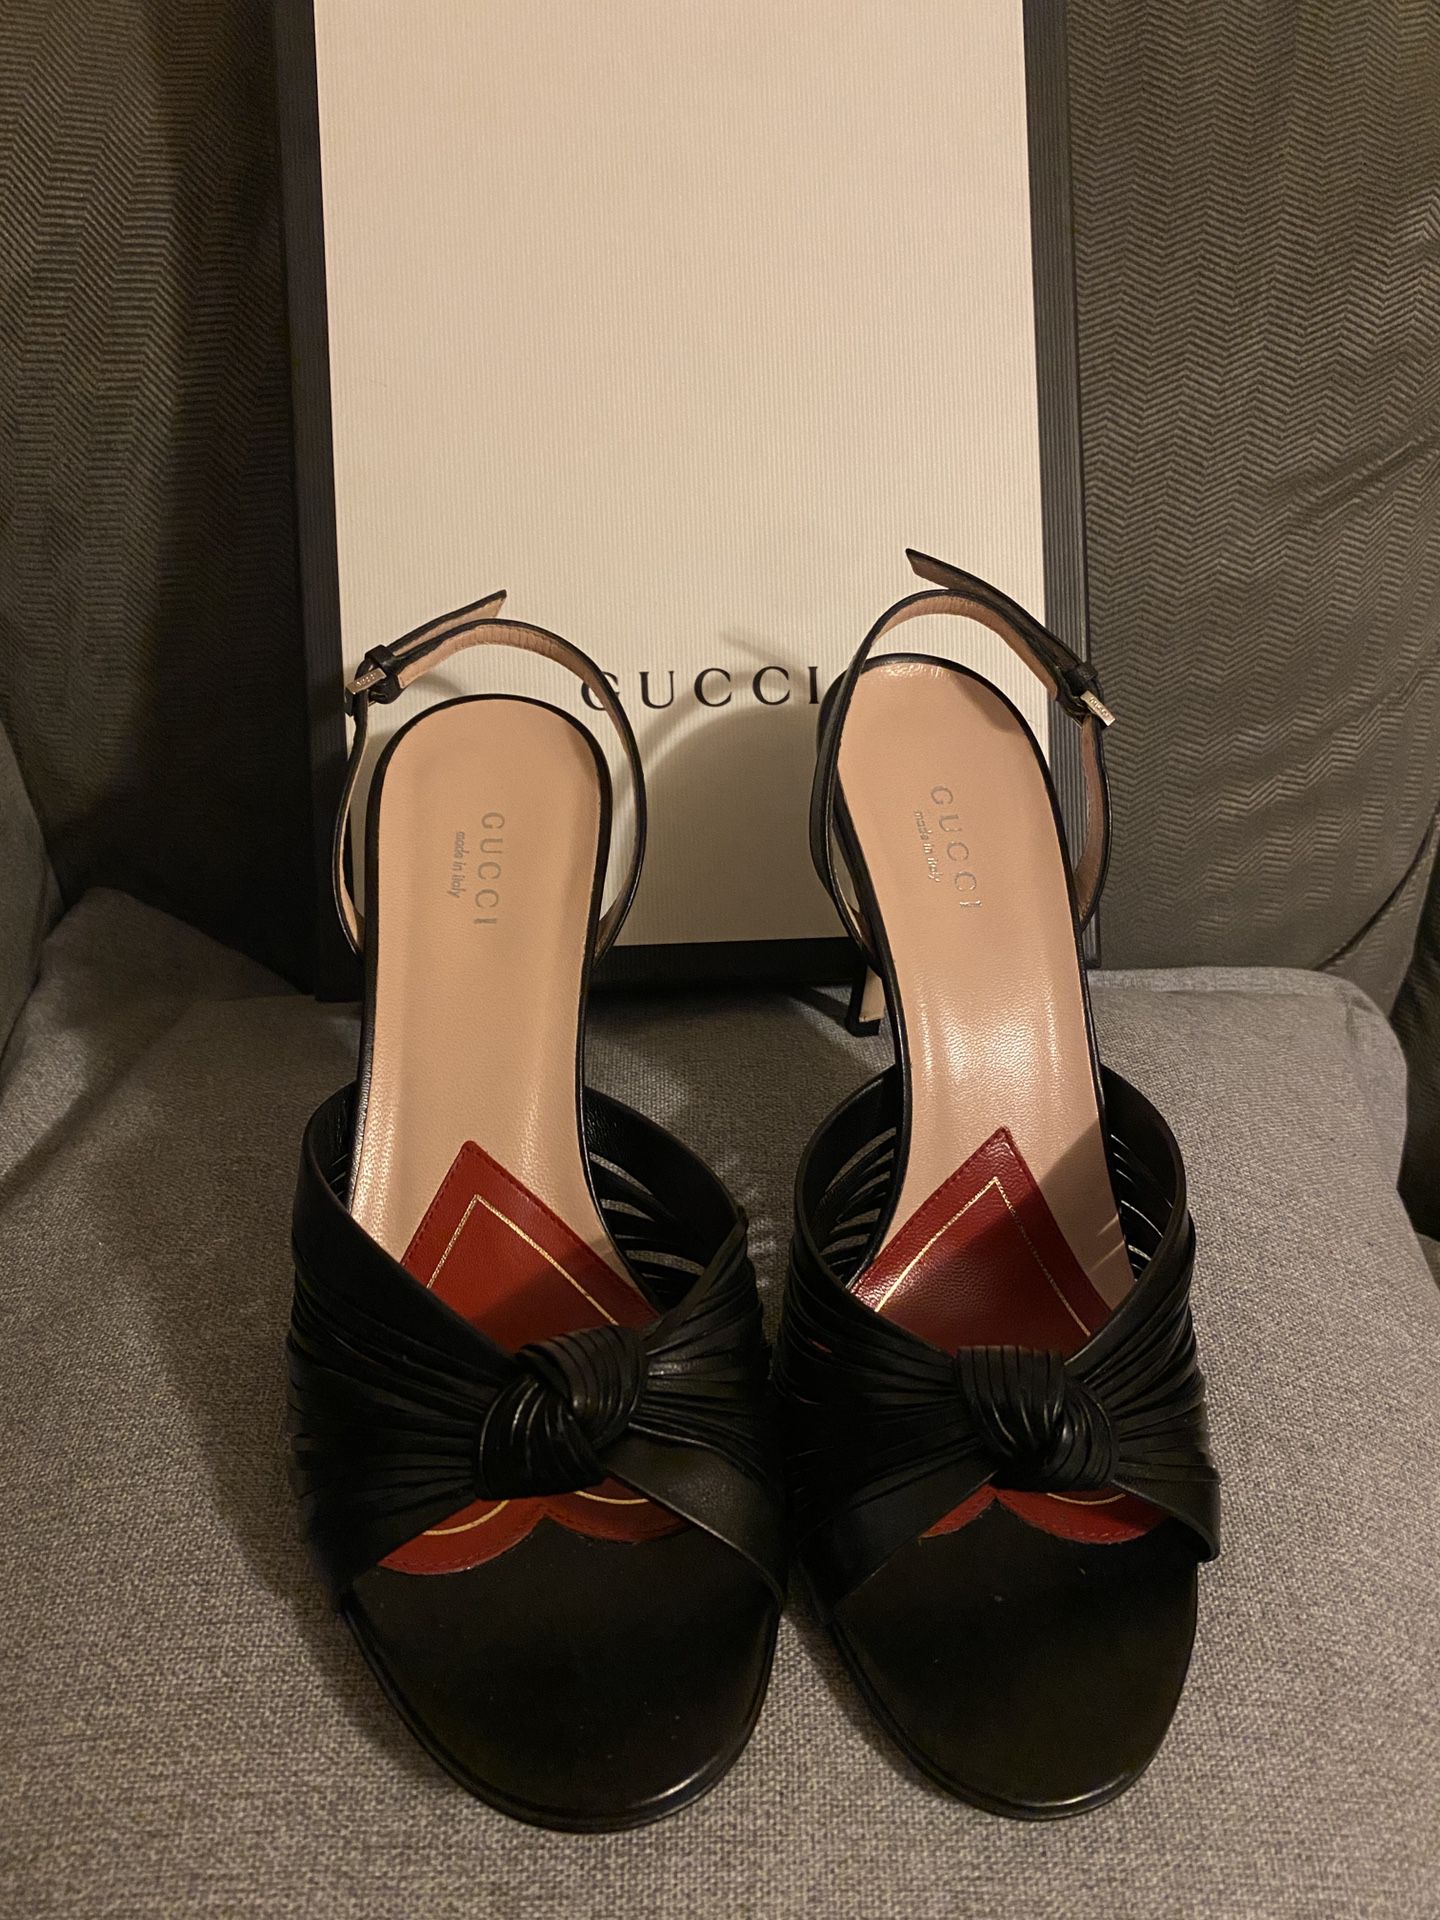 Gucci Casual Sandals Size 37/ Us 7